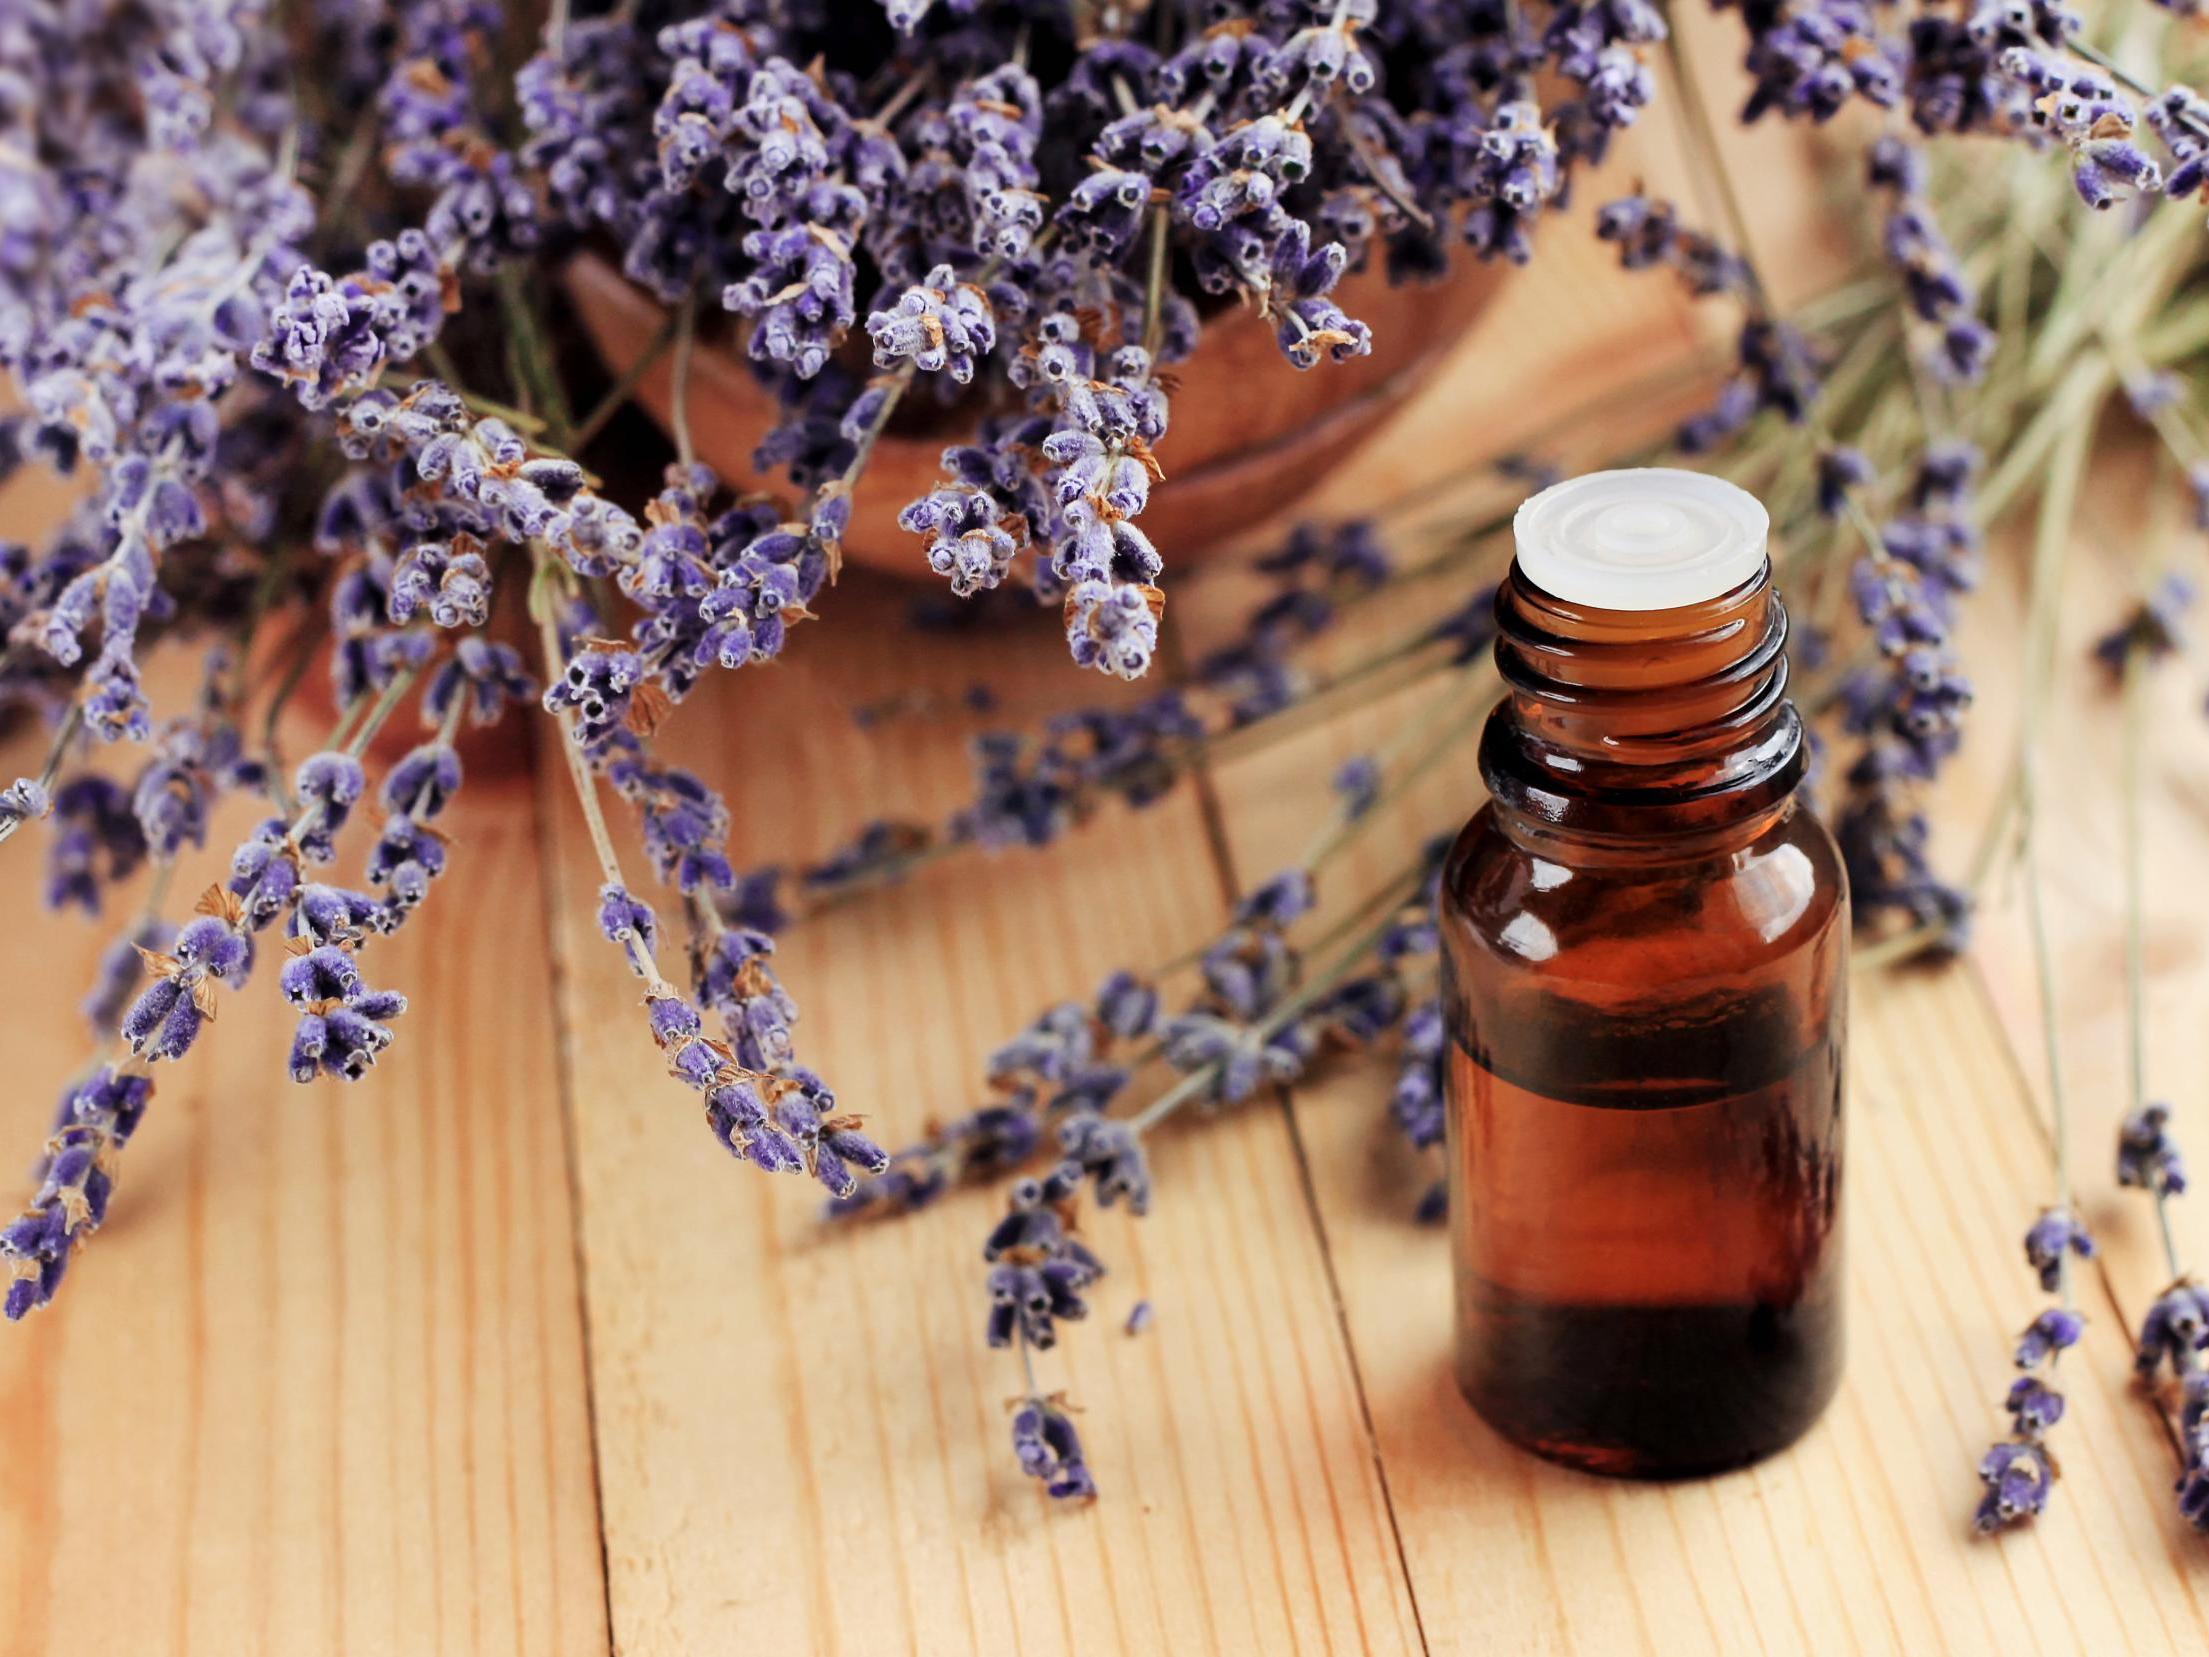 Lavender oil is among the most popular essential oils in the world and has been used in herbal remedies and rituals for thousands of years